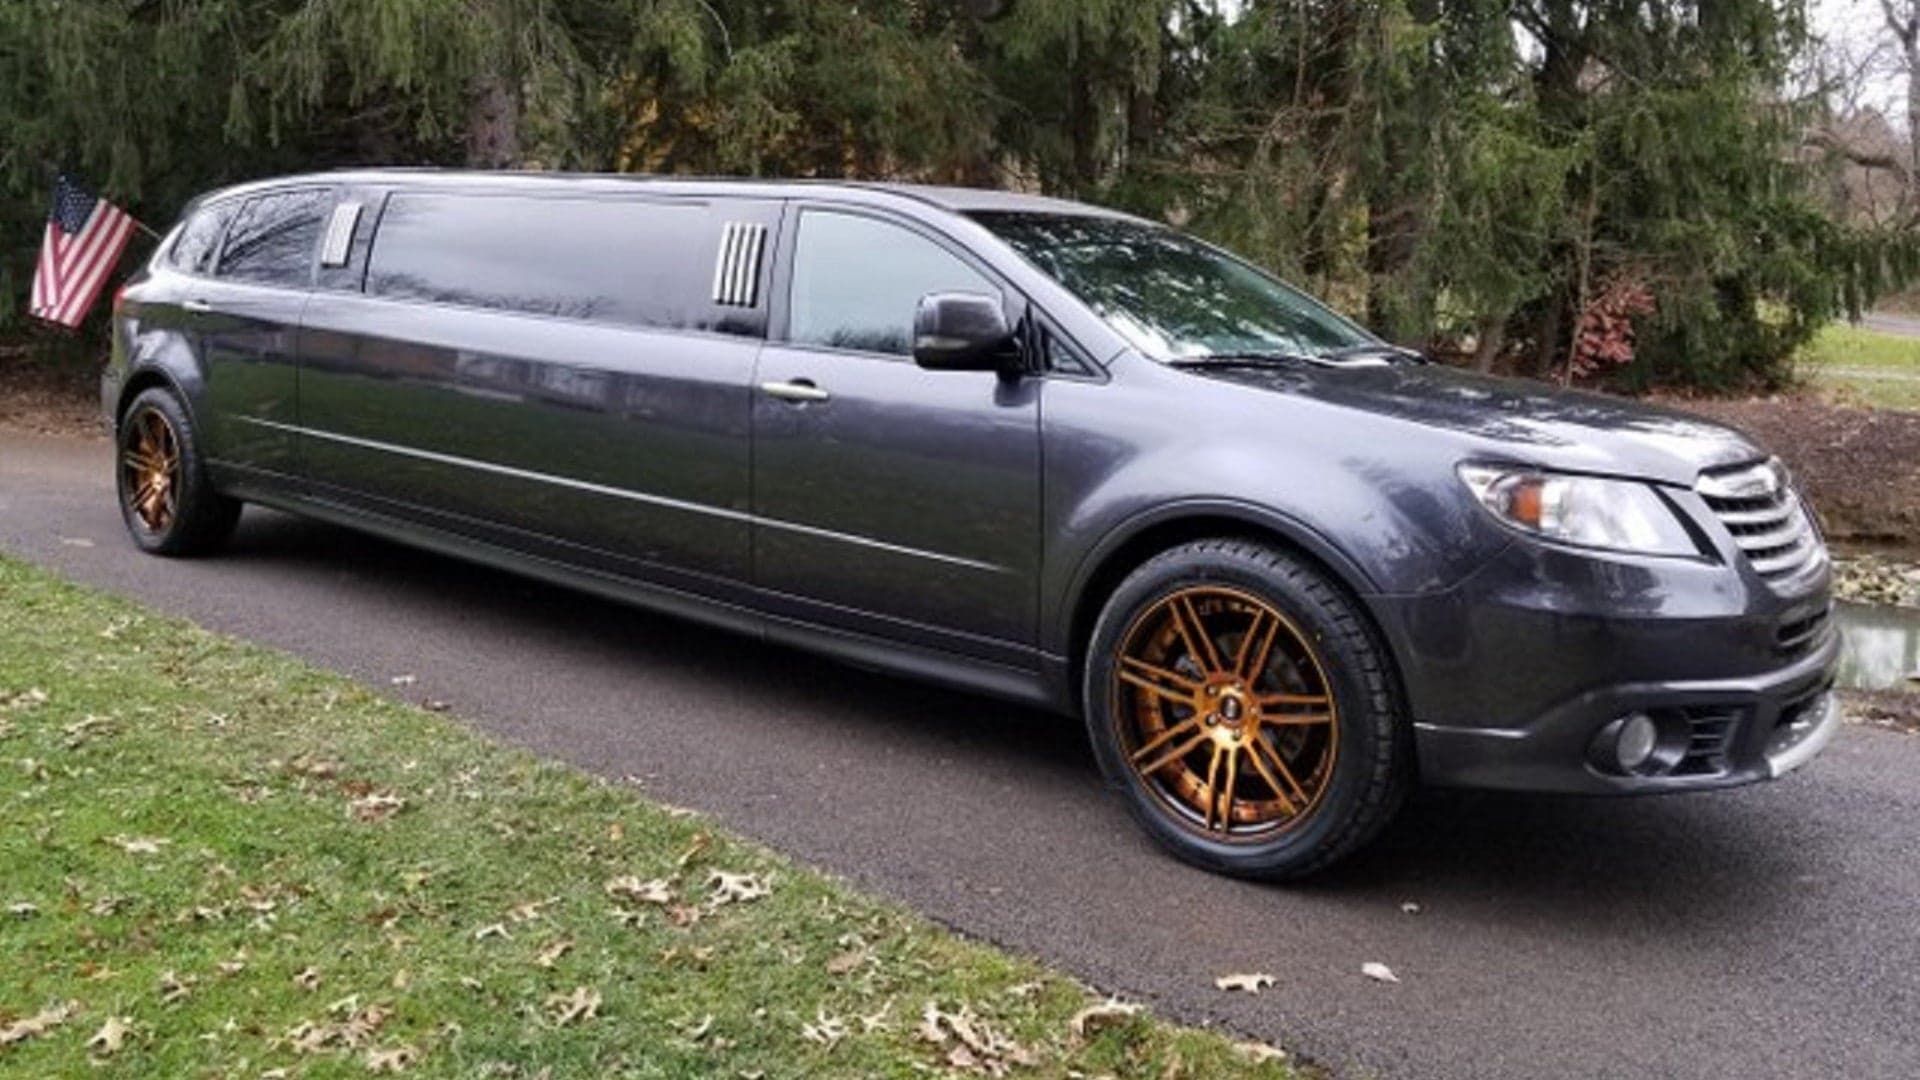 You Can Buy This Subaru Tribeca Limo Right Now